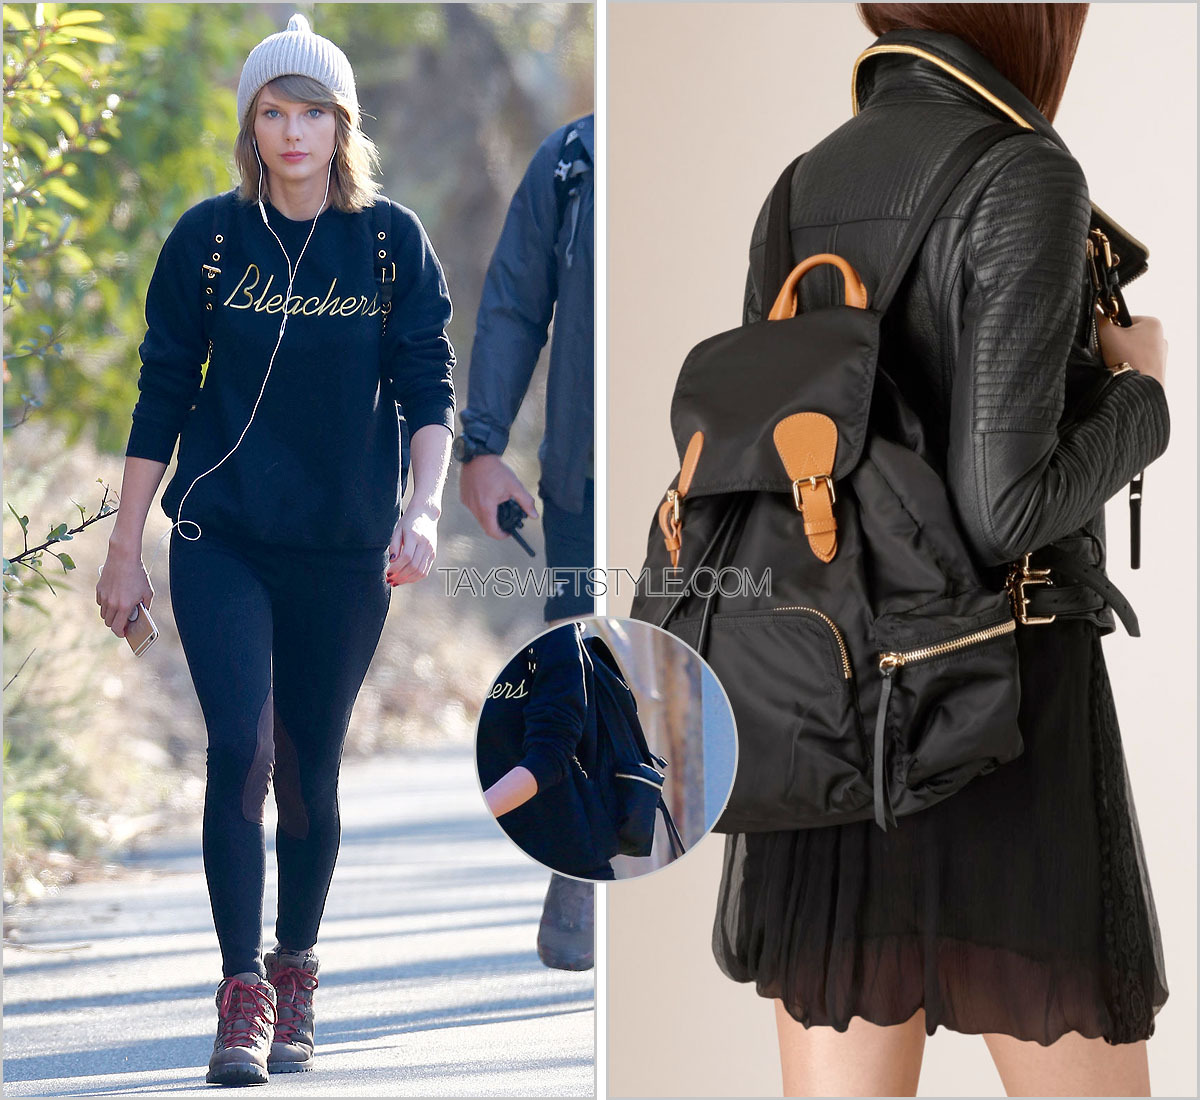 Taylor Swift Style — Out for a hike, Los Angeles, CA